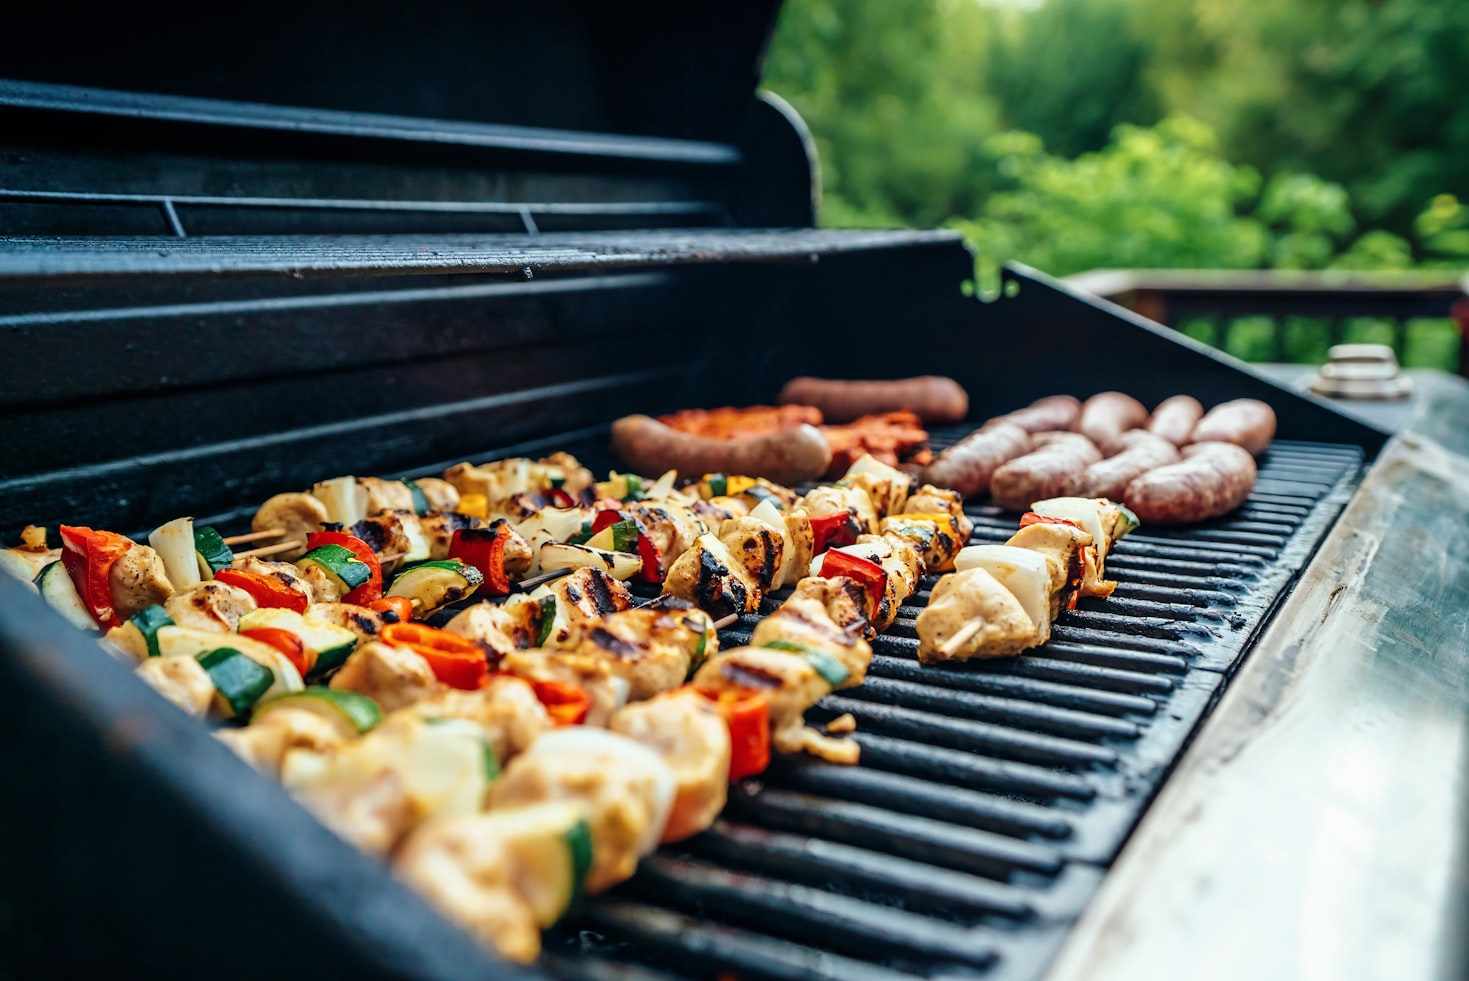 Top 10 Grill For Under 300 Based On User Rating